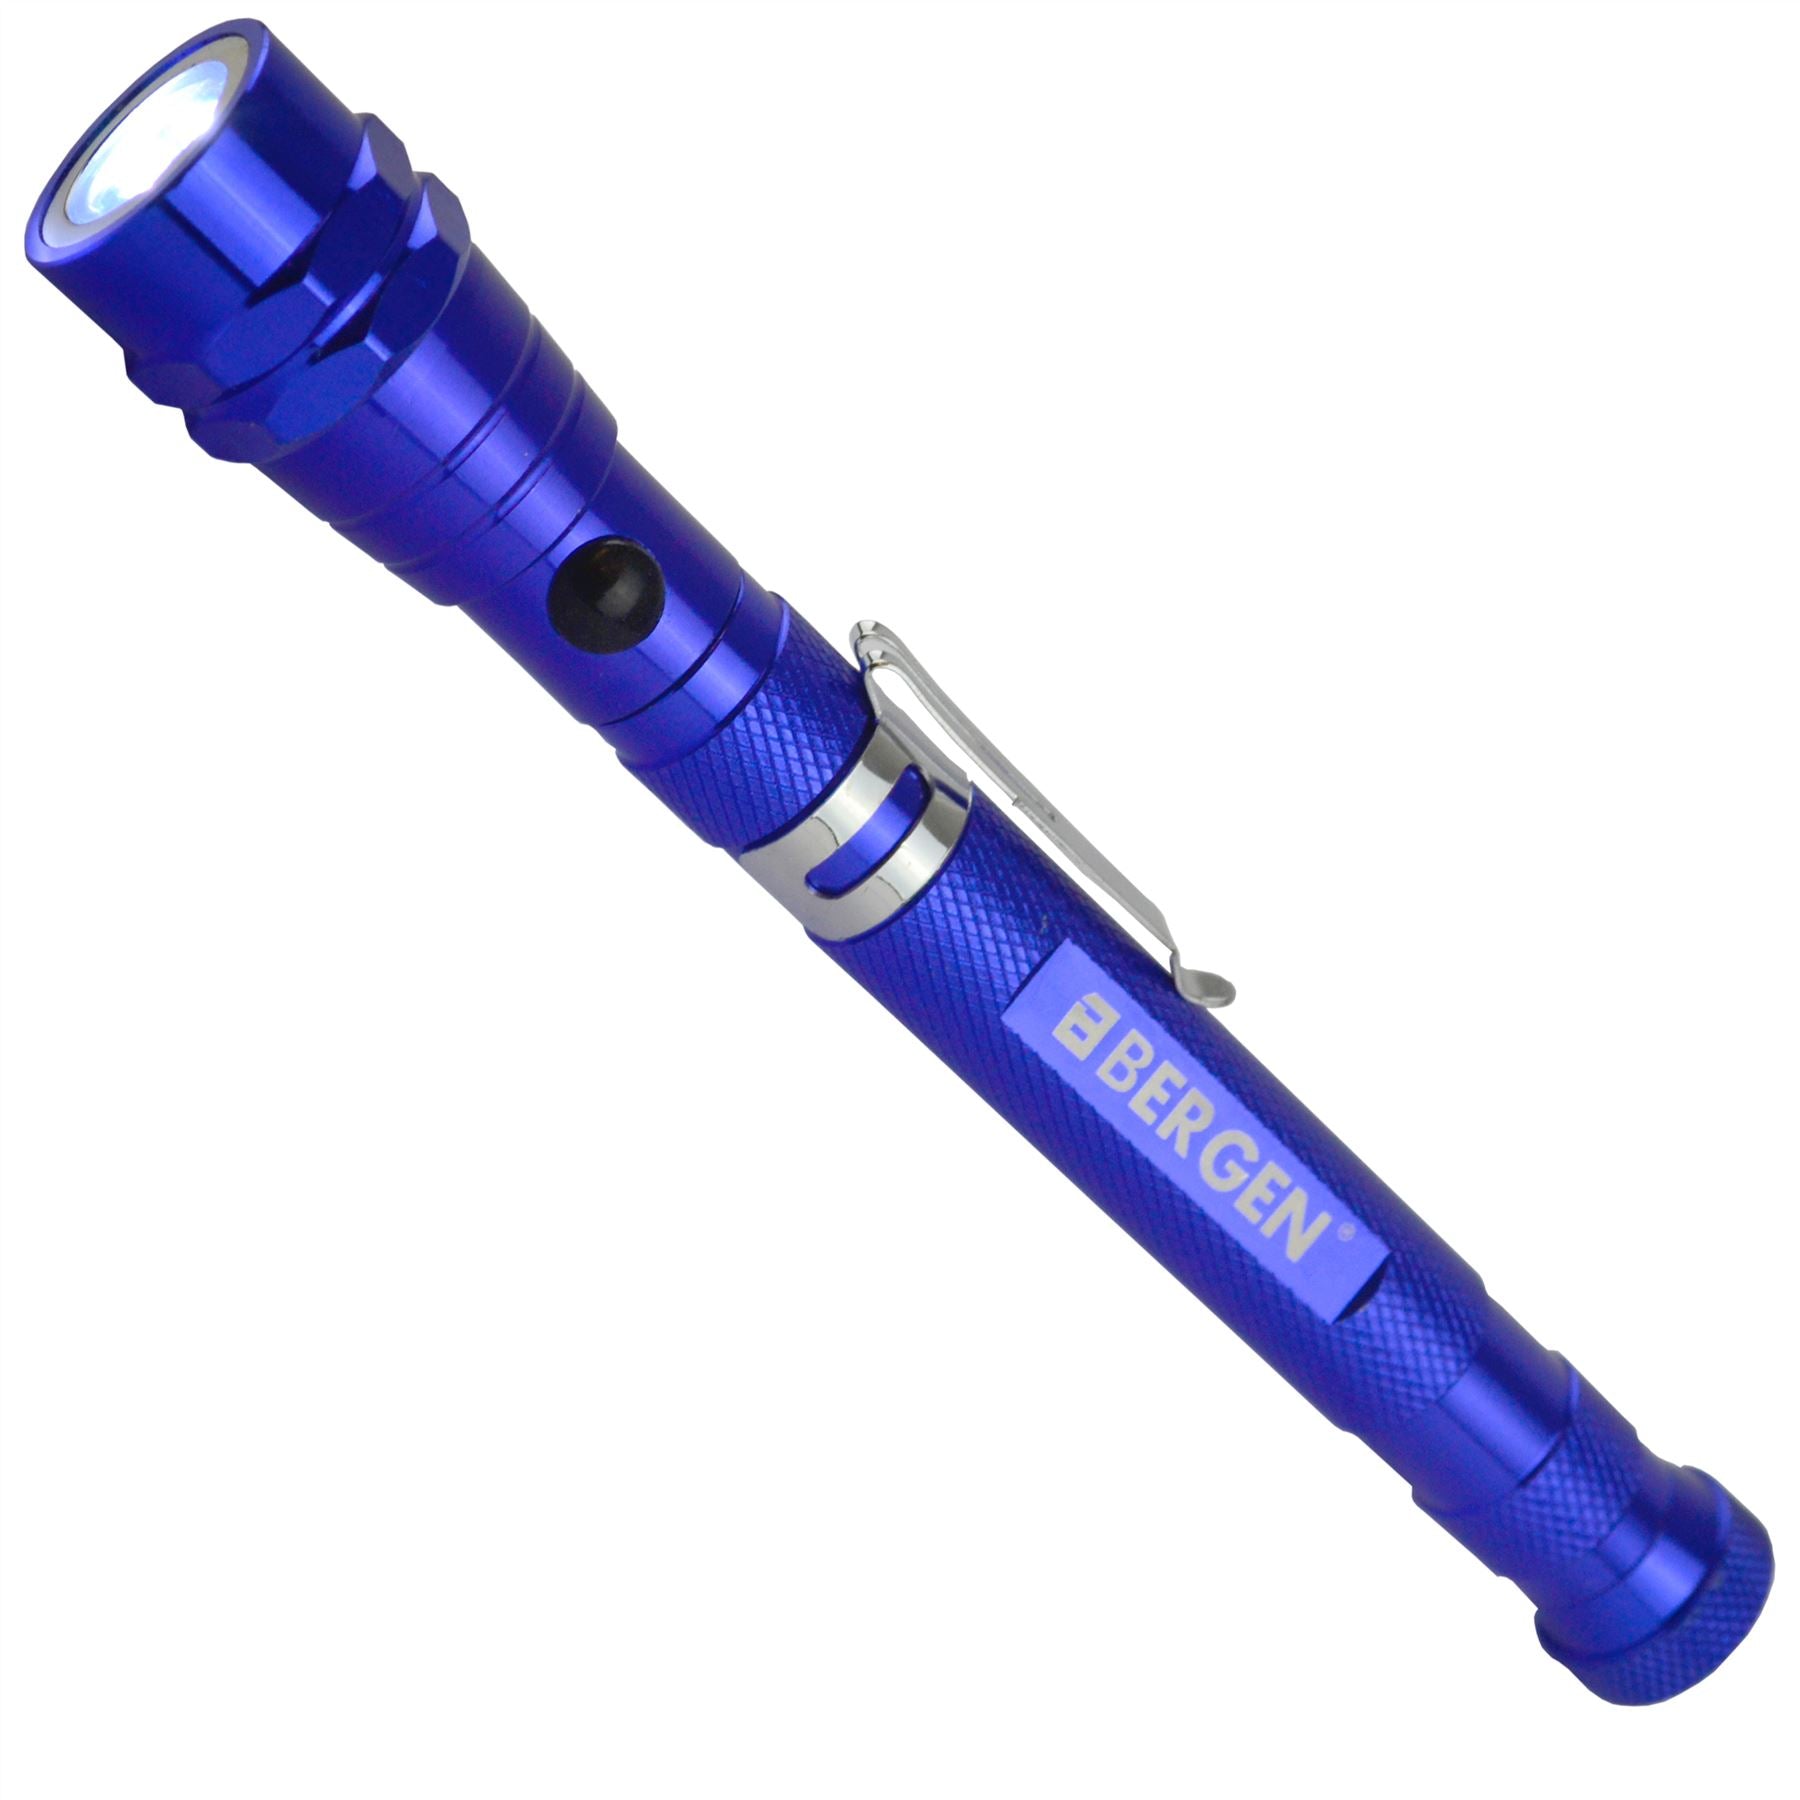 3 LED Torch Flash Light Telescopic Flexible Magnetic 5lb Pick Up Tool AT981